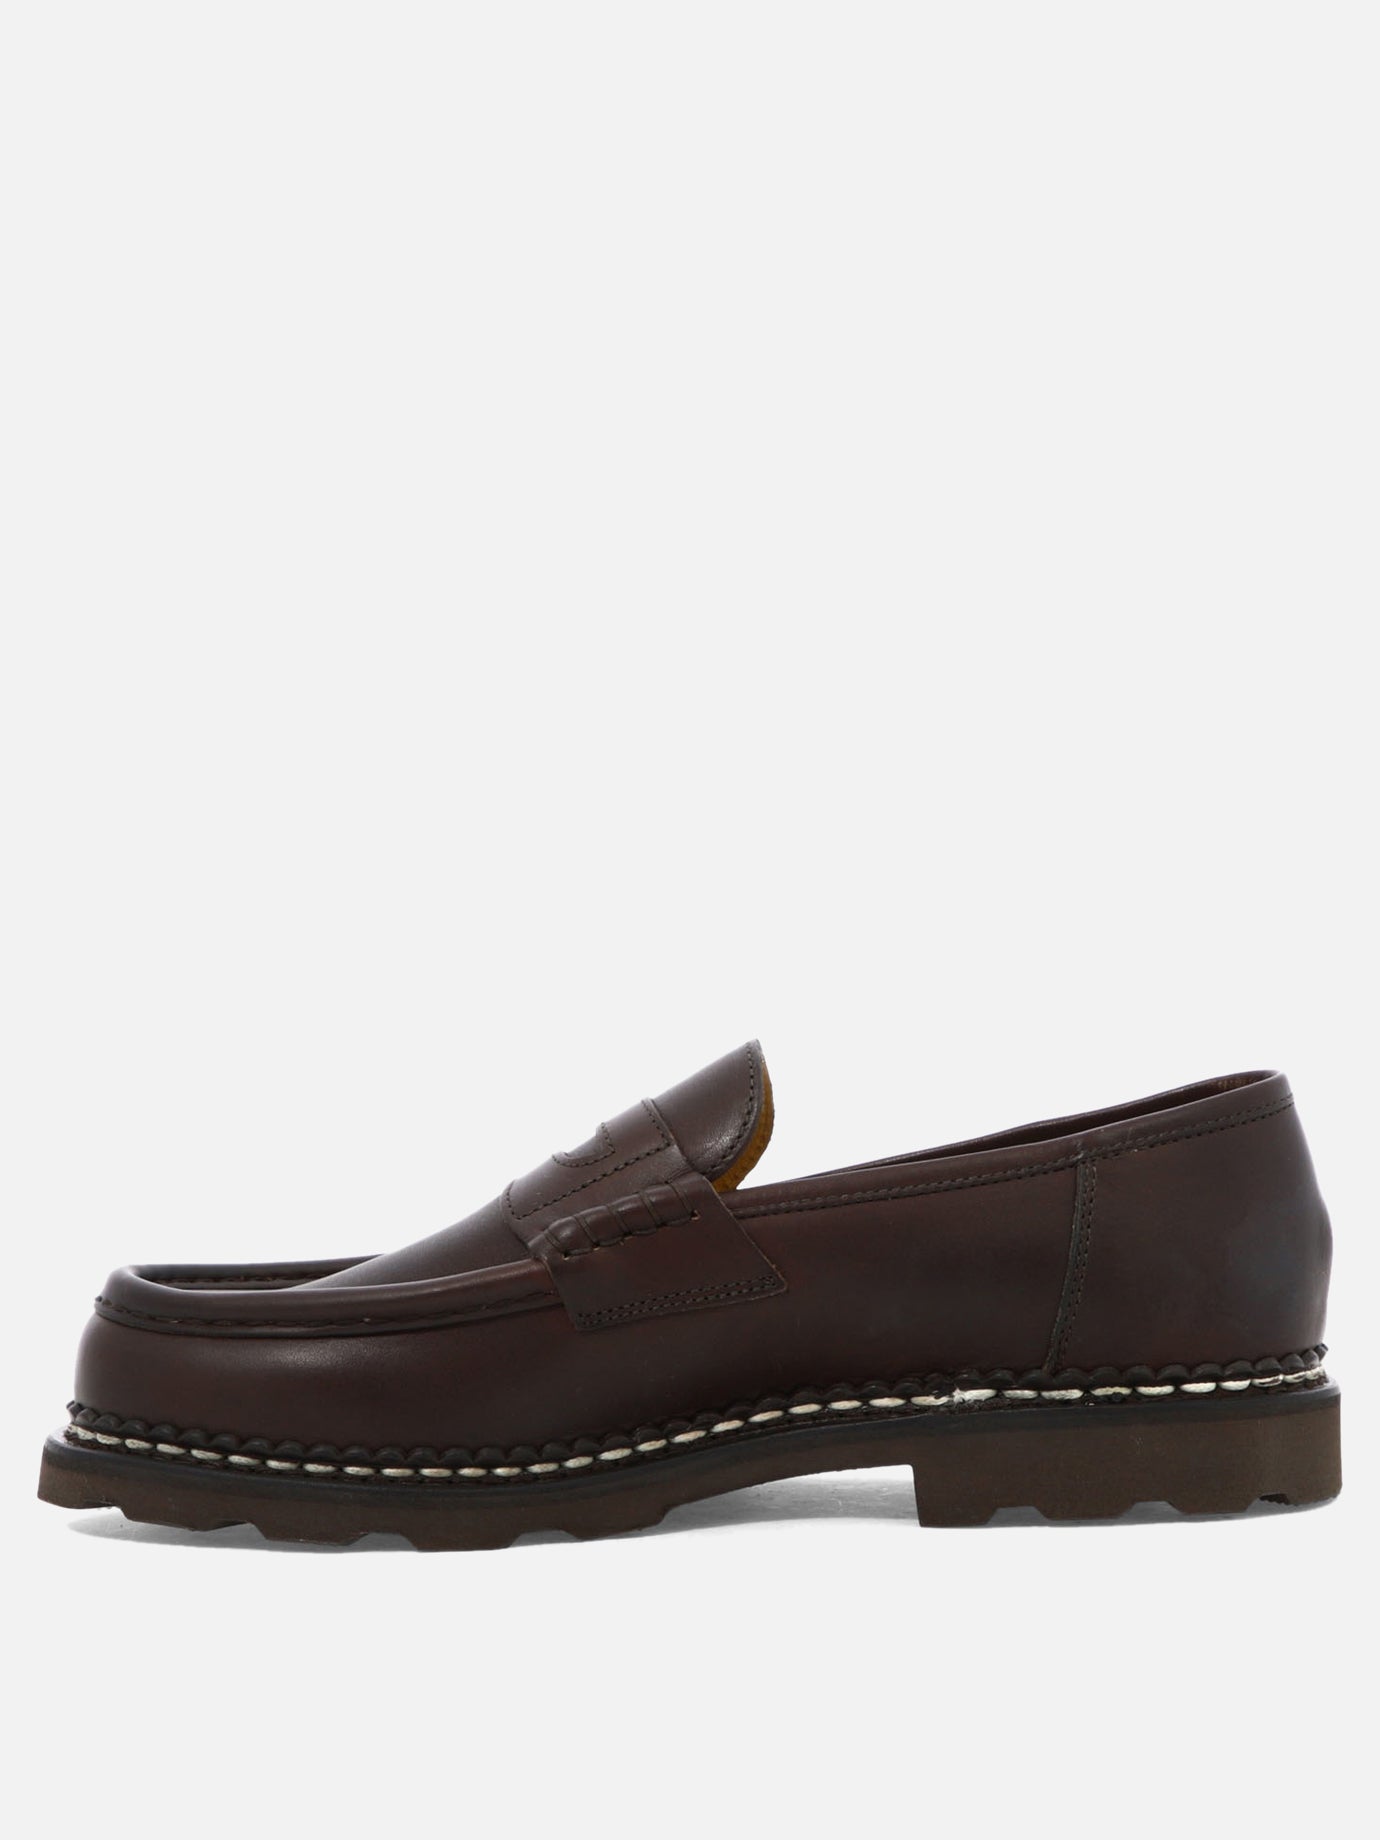 "Reims" loafers